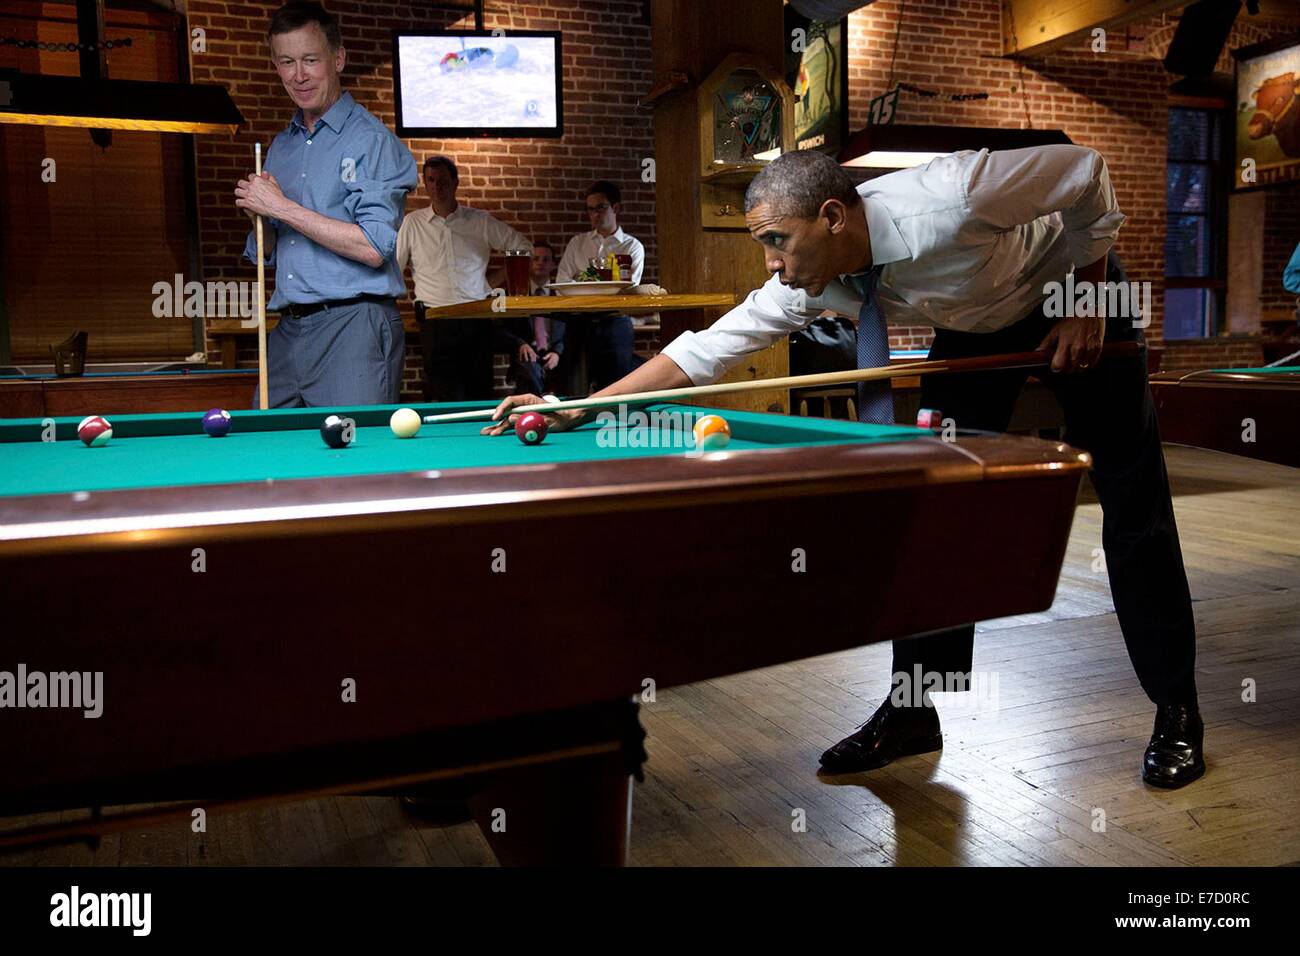 US President Barack Obama whistles along to the music as he shoots pool with Gov. John Hickenlooper July 8, 2014 in in Denver, Colorado. Stock Photo